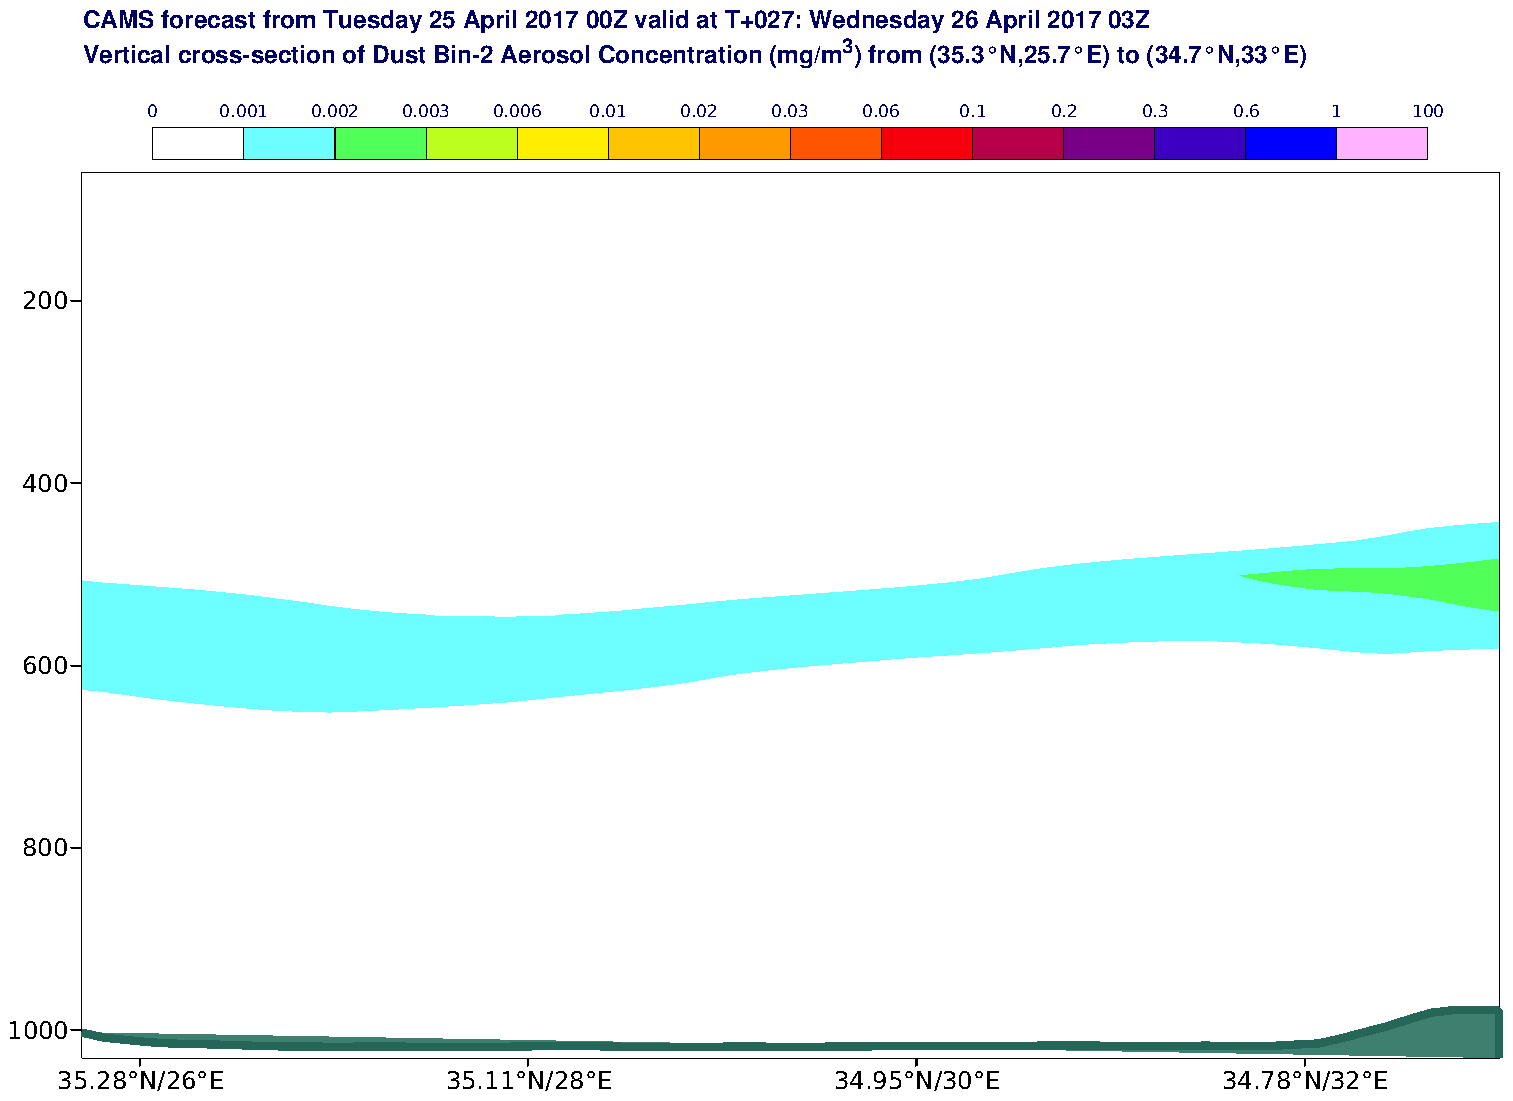 Vertical cross-section of Dust Bin-2 Aerosol Concentration (mg/m3) valid at T27 - 2017-04-26 03:00